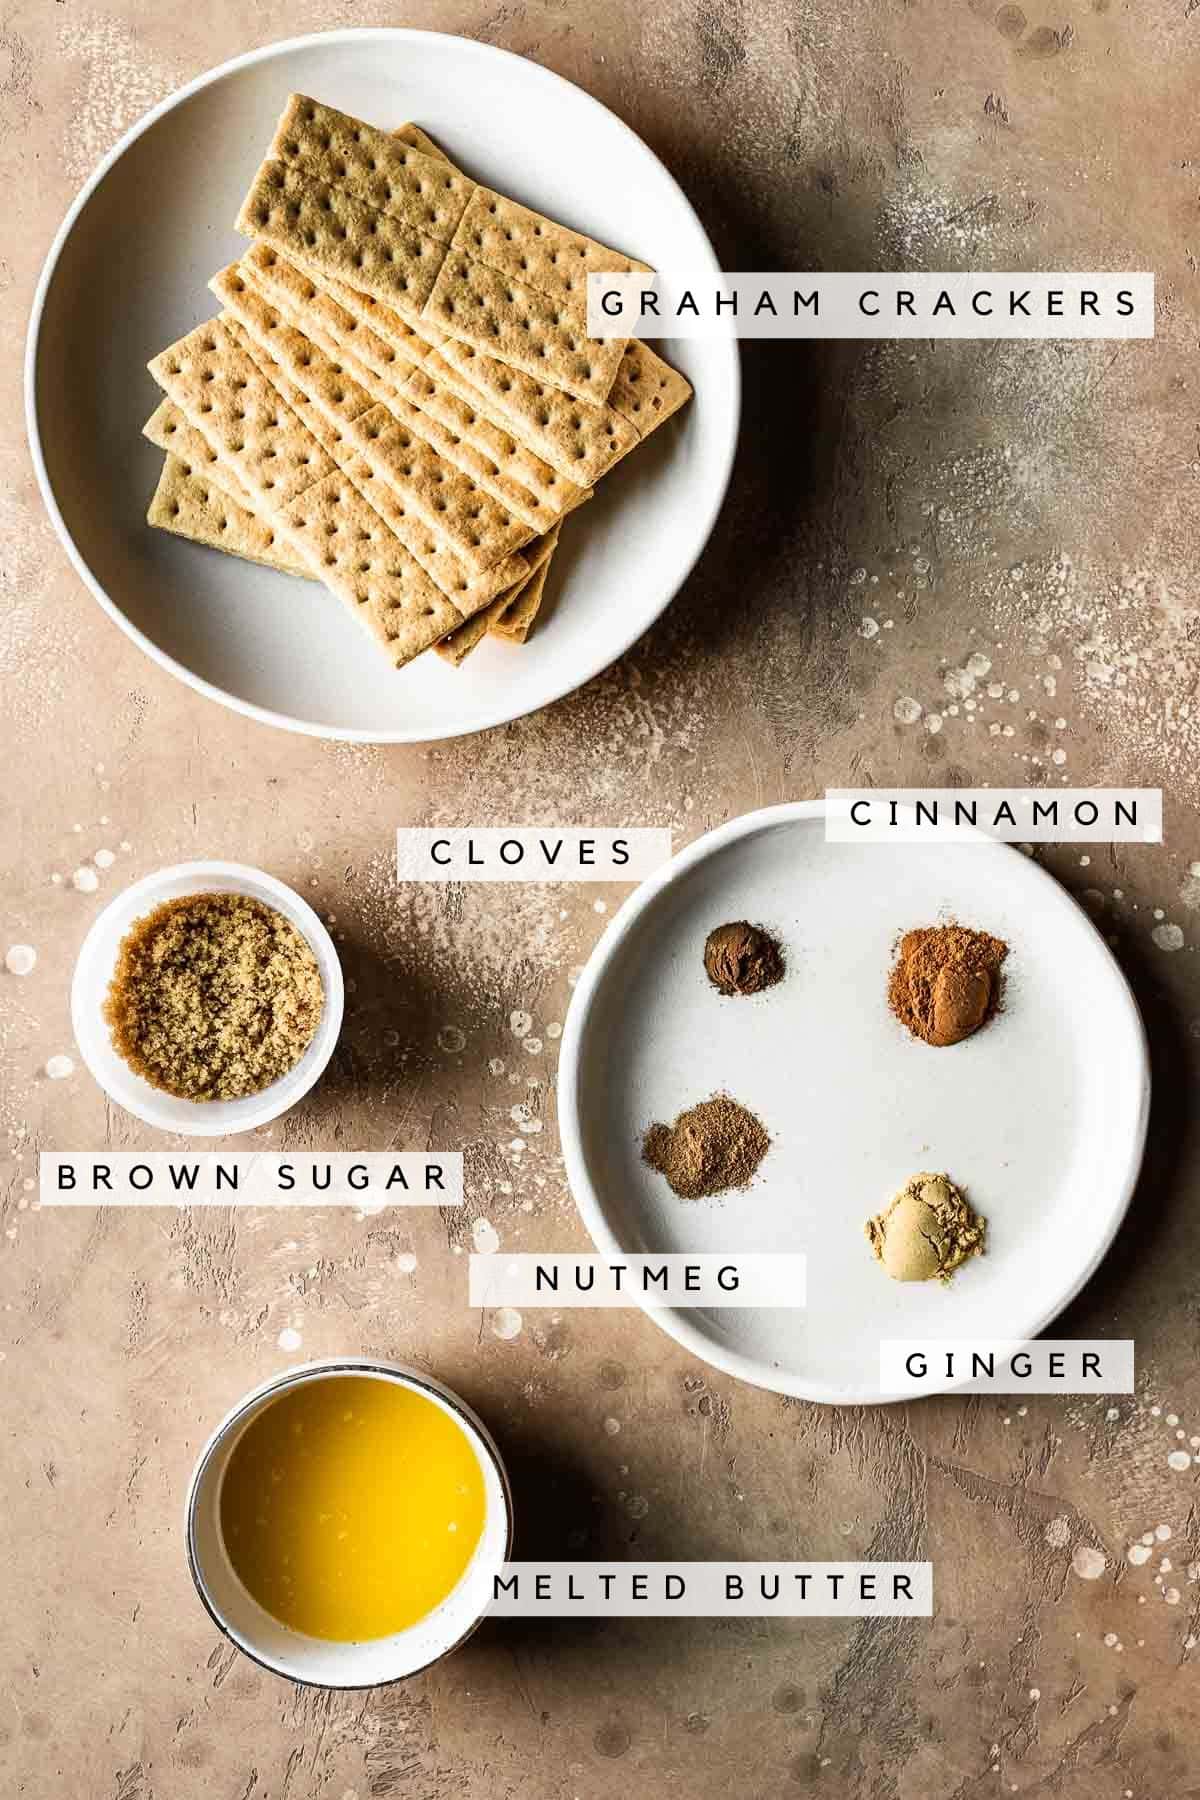 Labeled ingredients for gingerbread cheesecake crust.